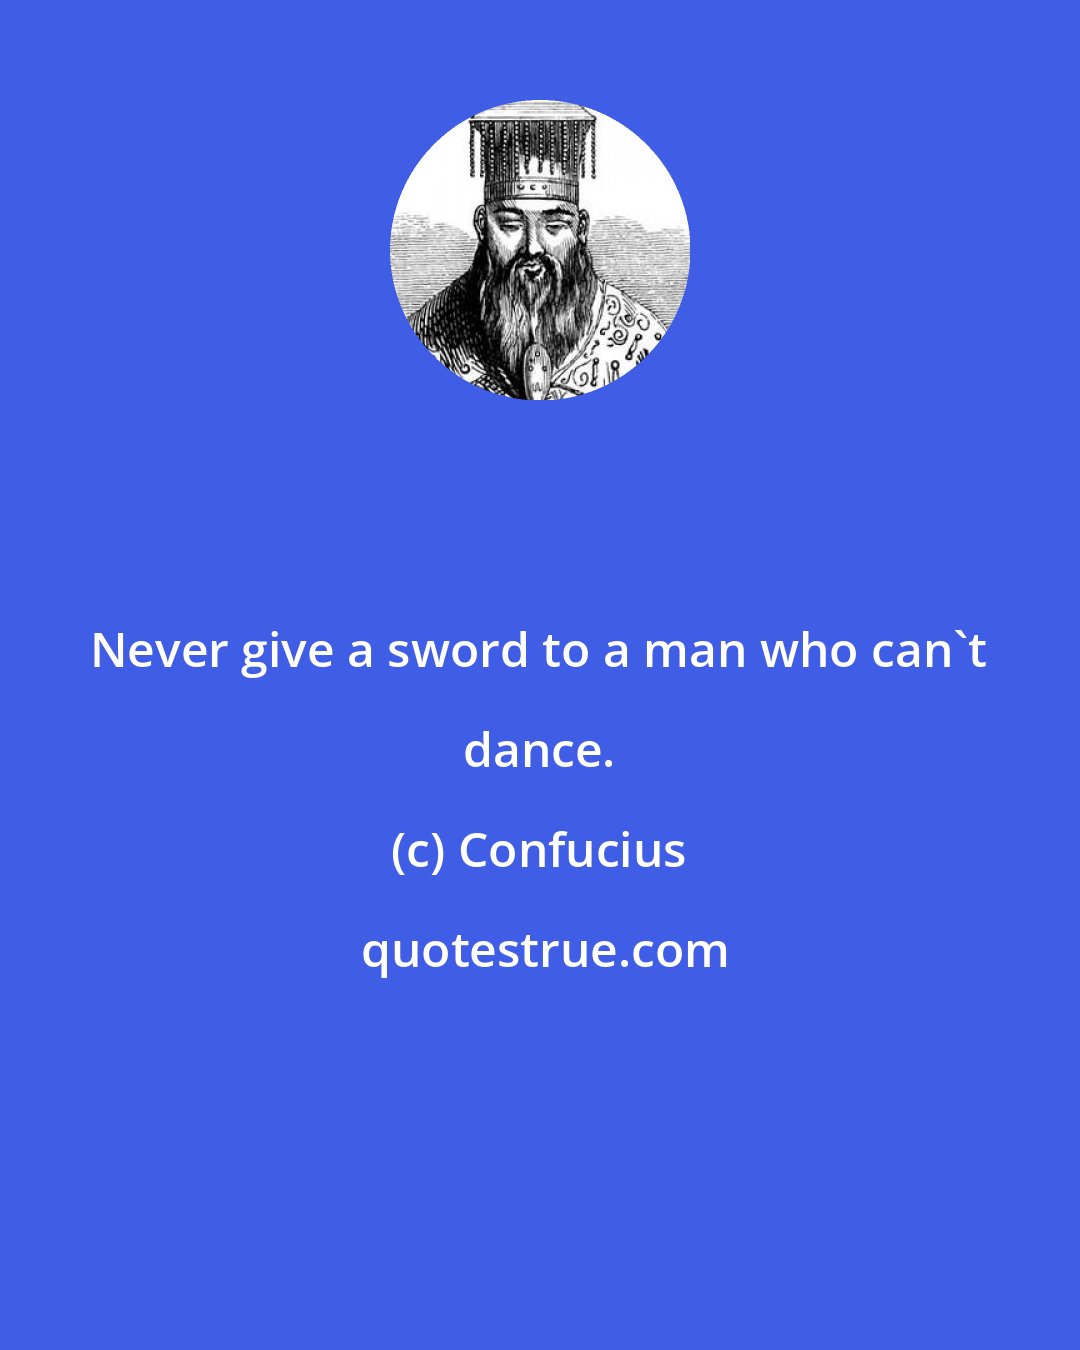 Confucius: Never give a sword to a man who can't dance.